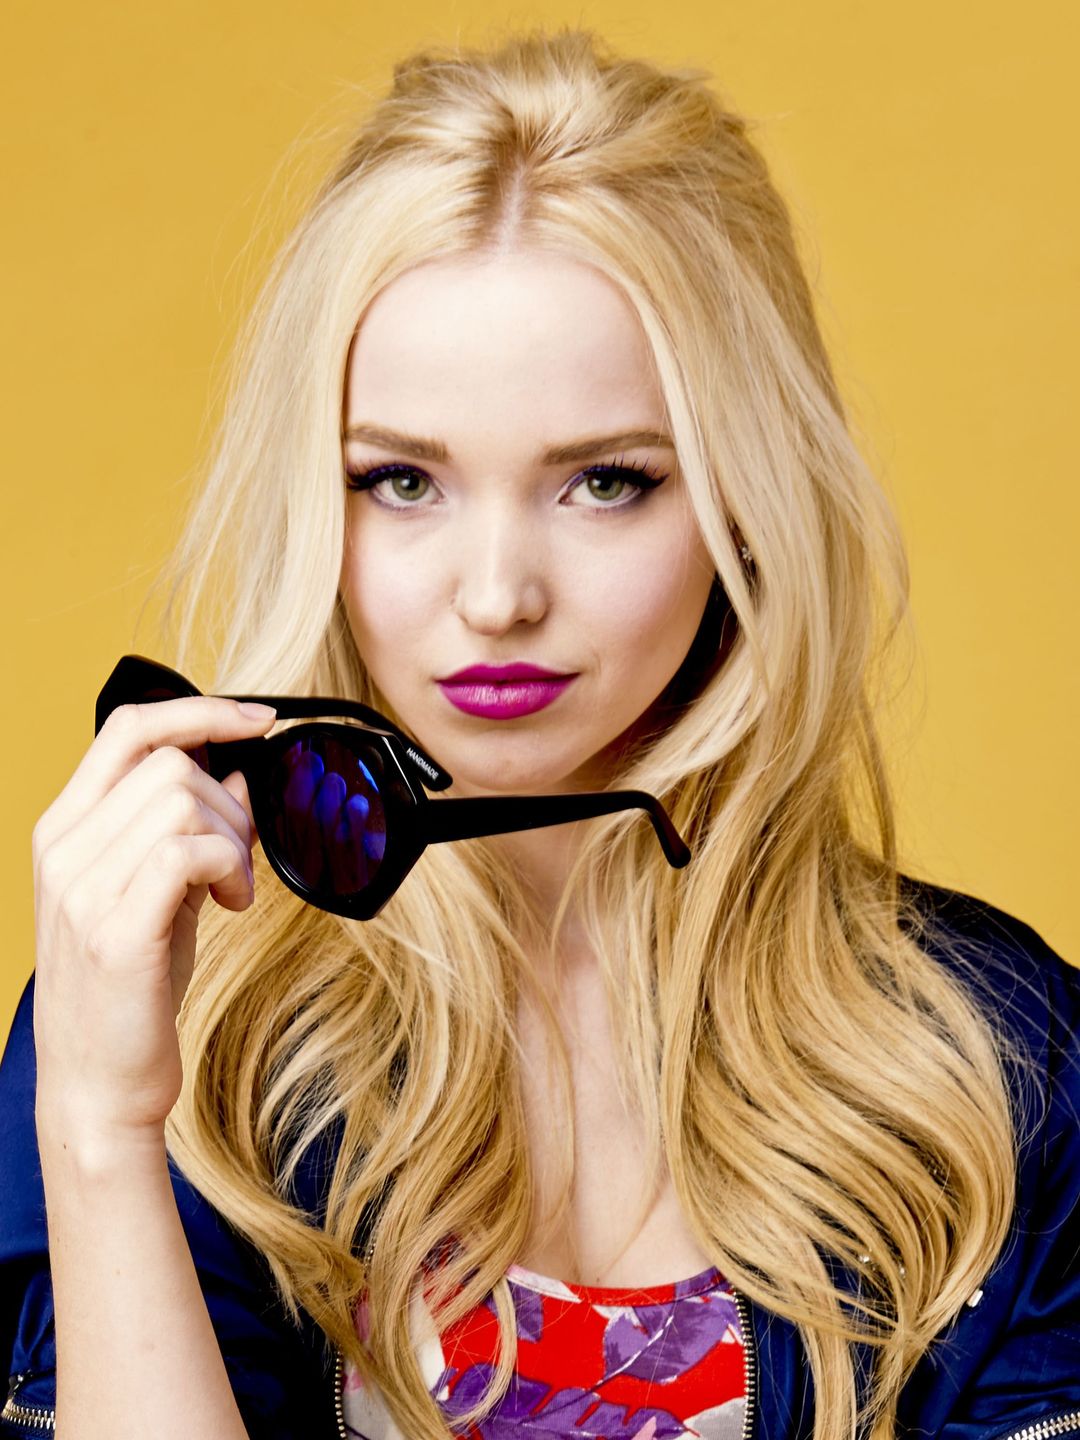 Dove Cameron who are her parents